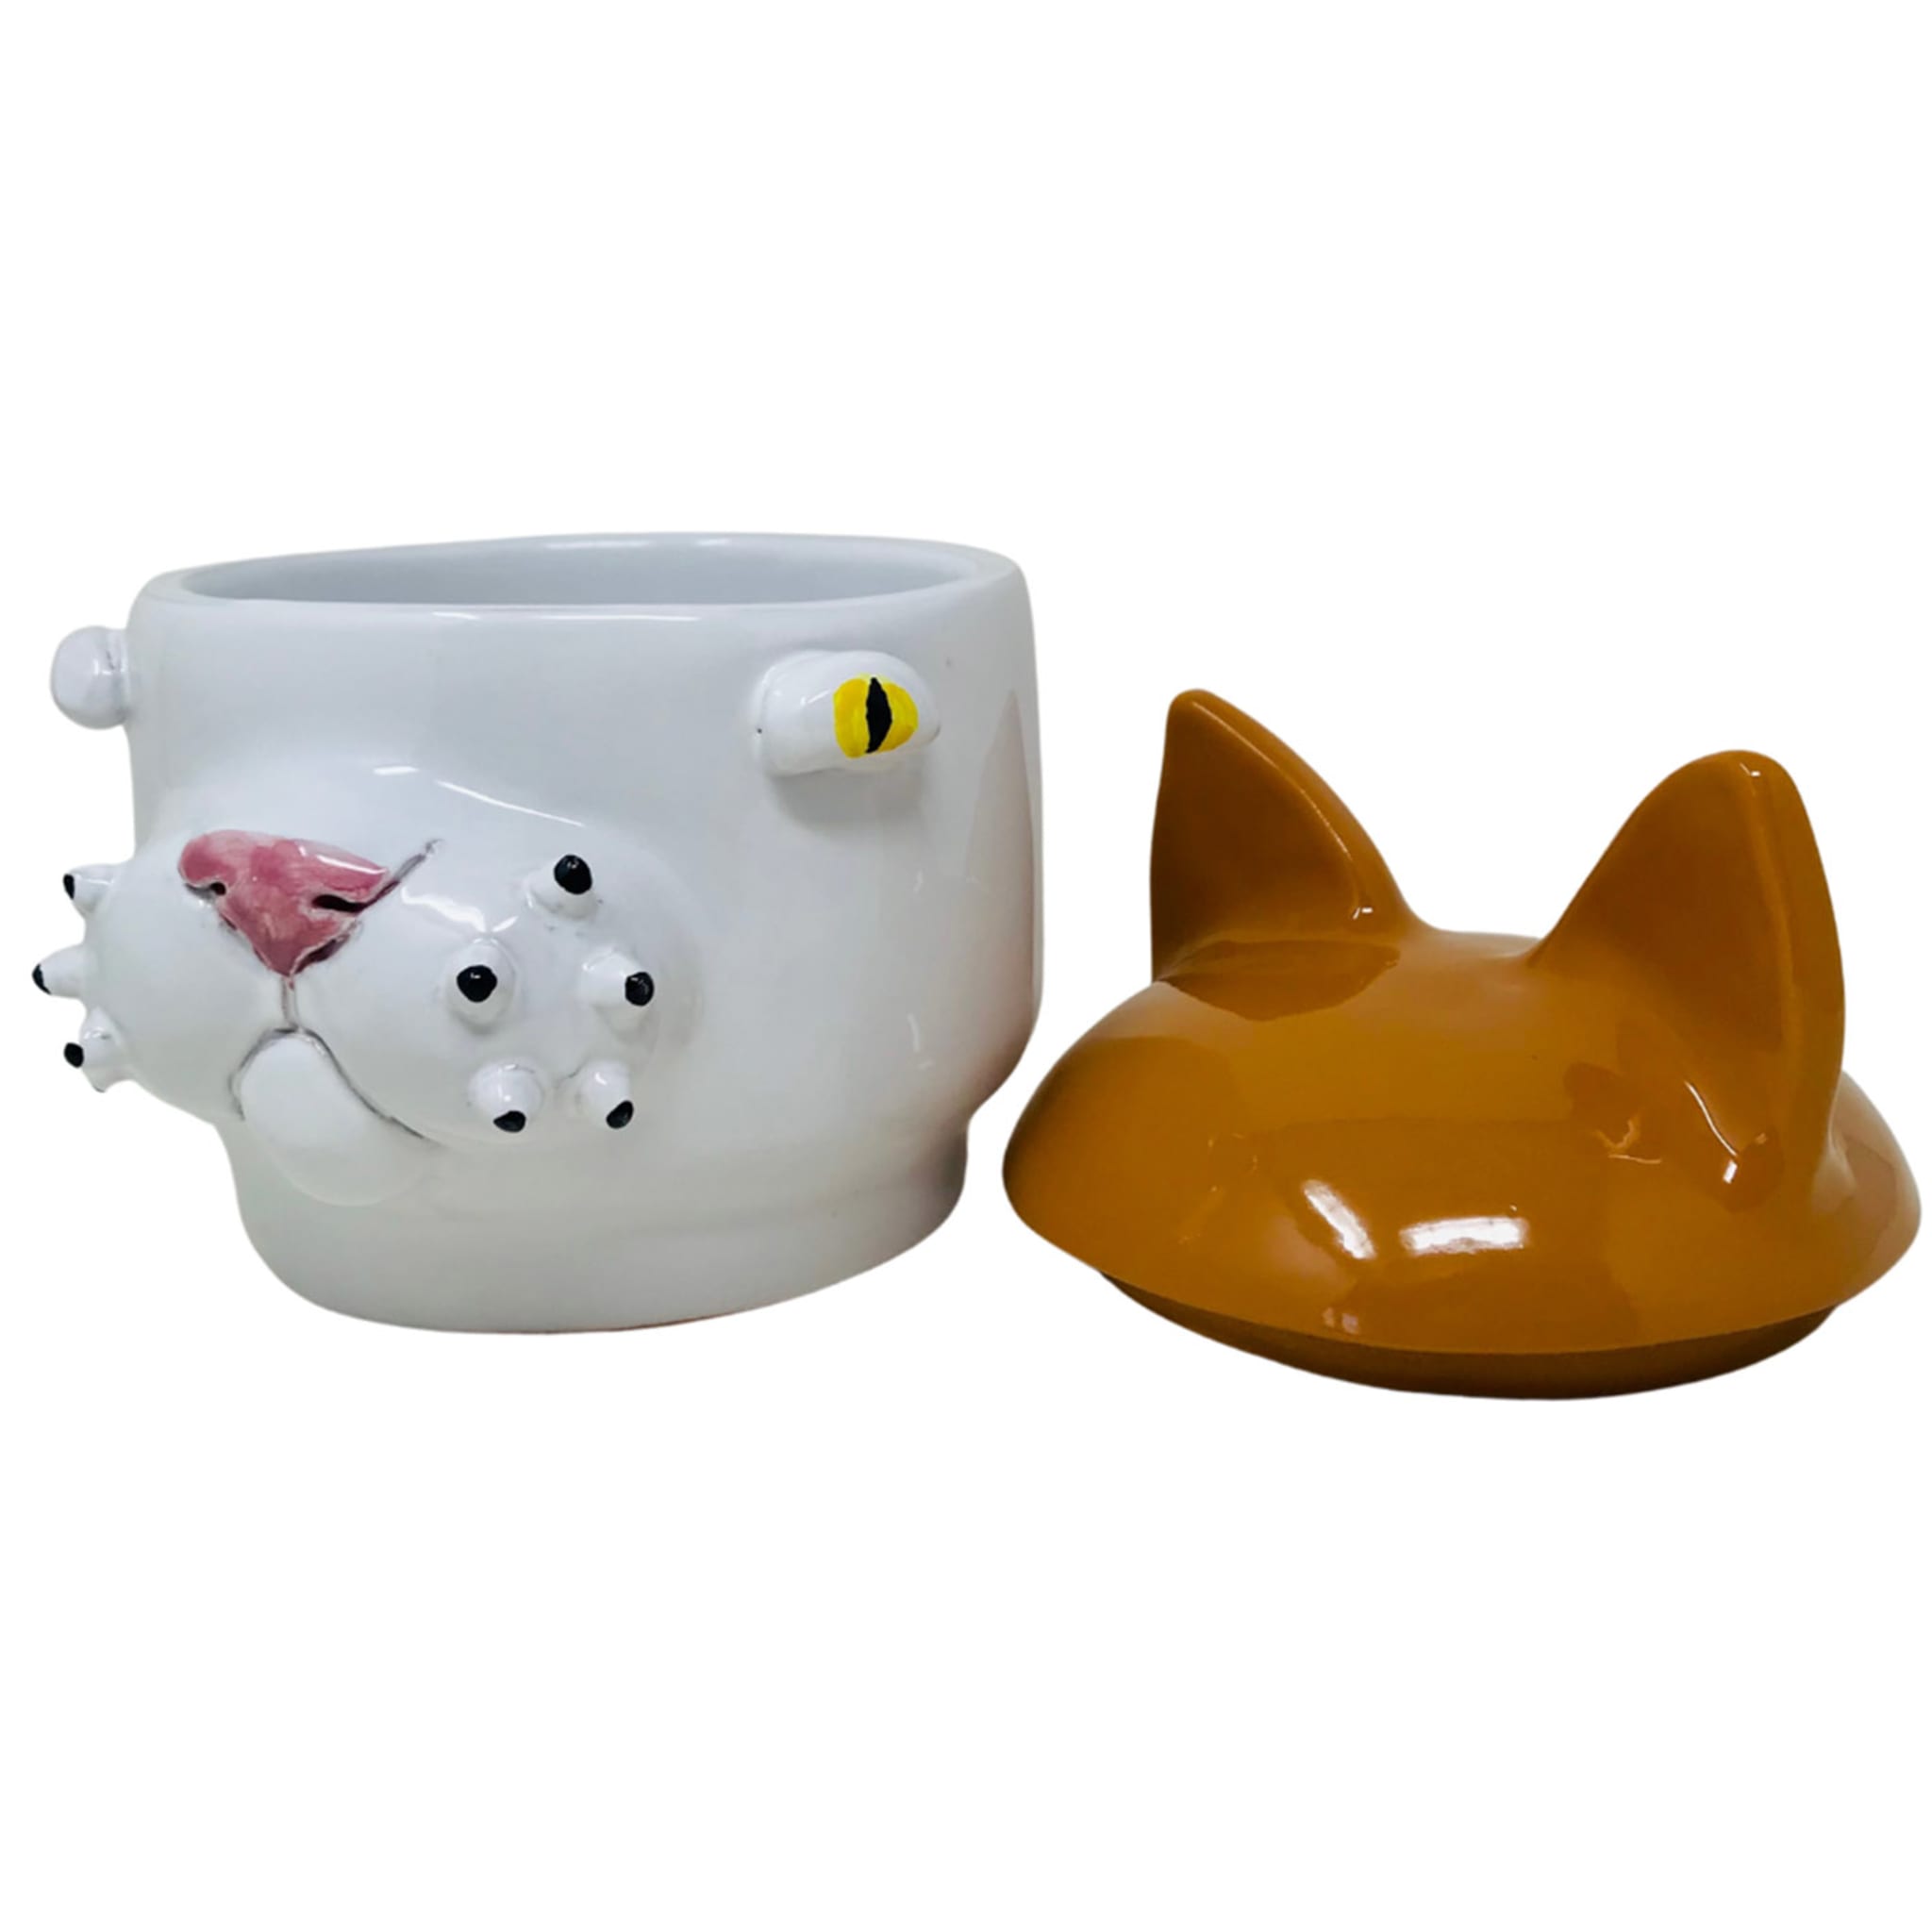 Small Orange and White Cat Container with Lid - Alternative view 2